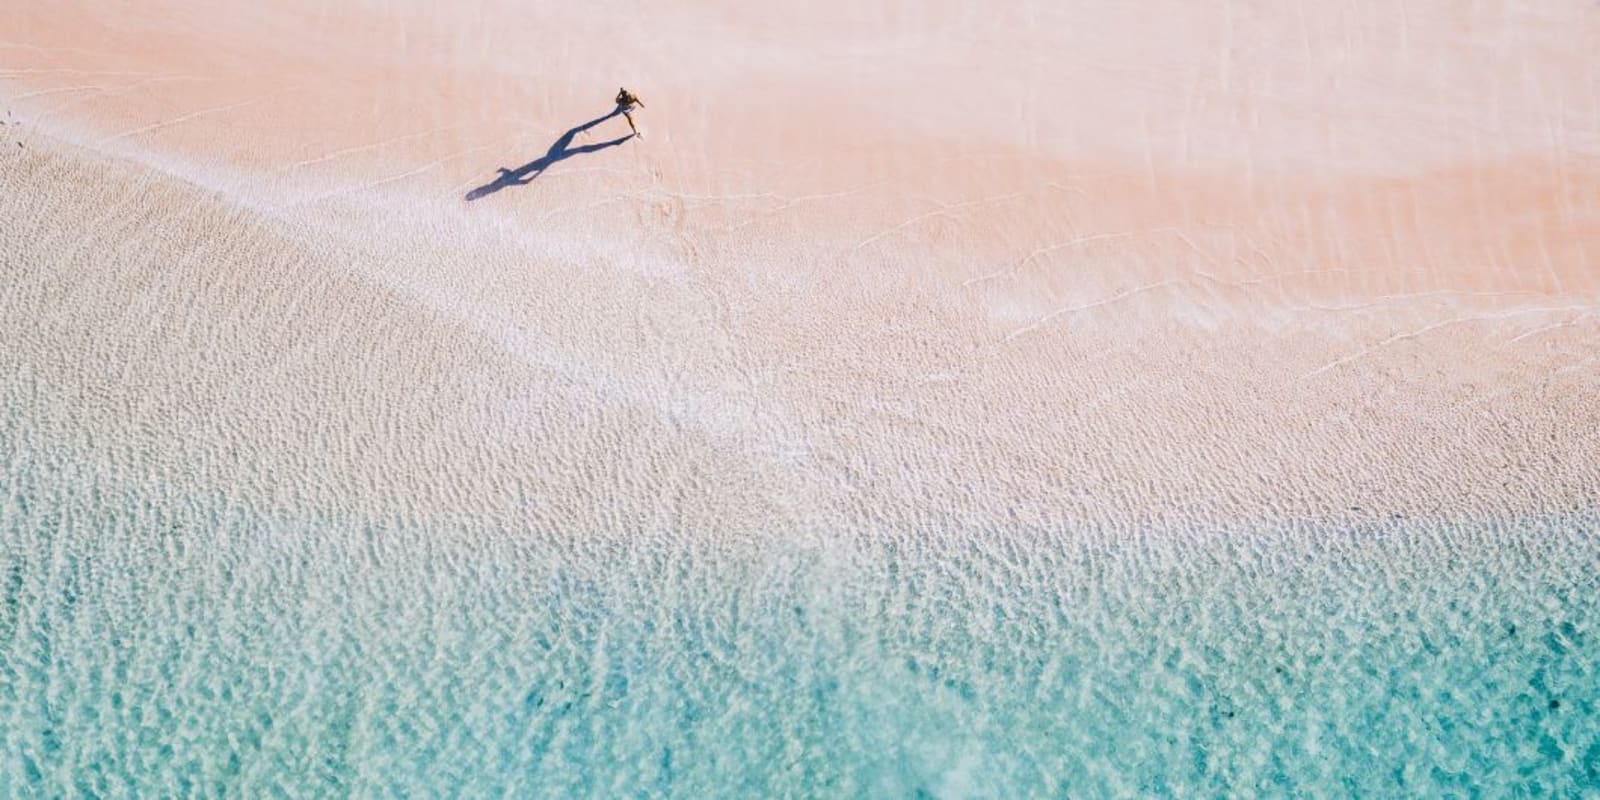 Aerial view of a person walking along a beach